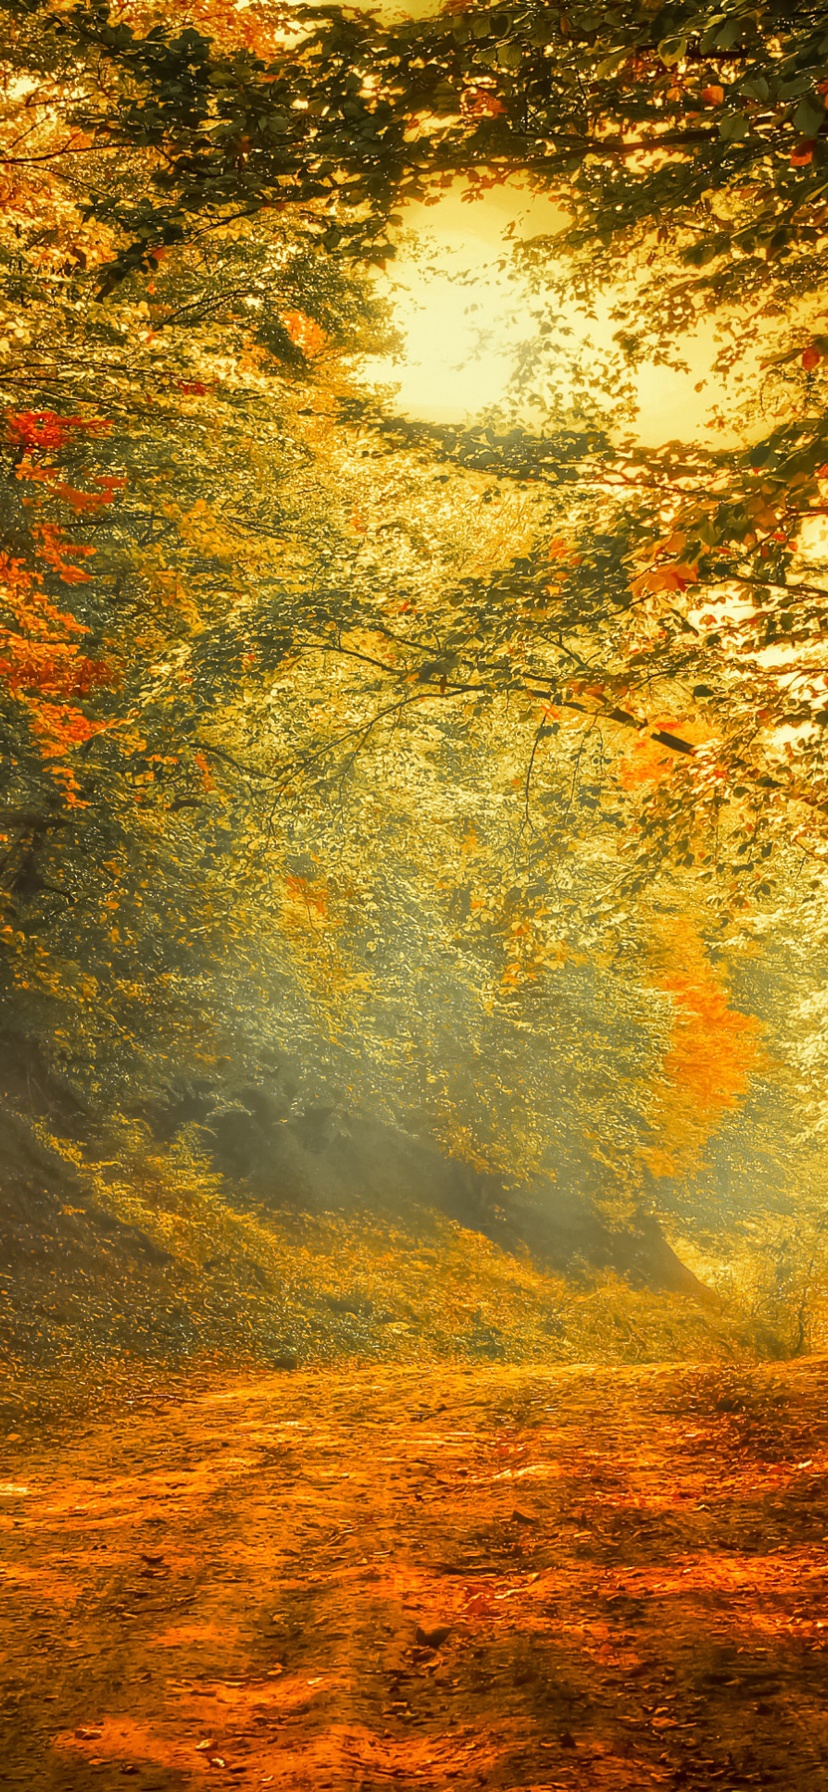 Autumn Trees Road Forest